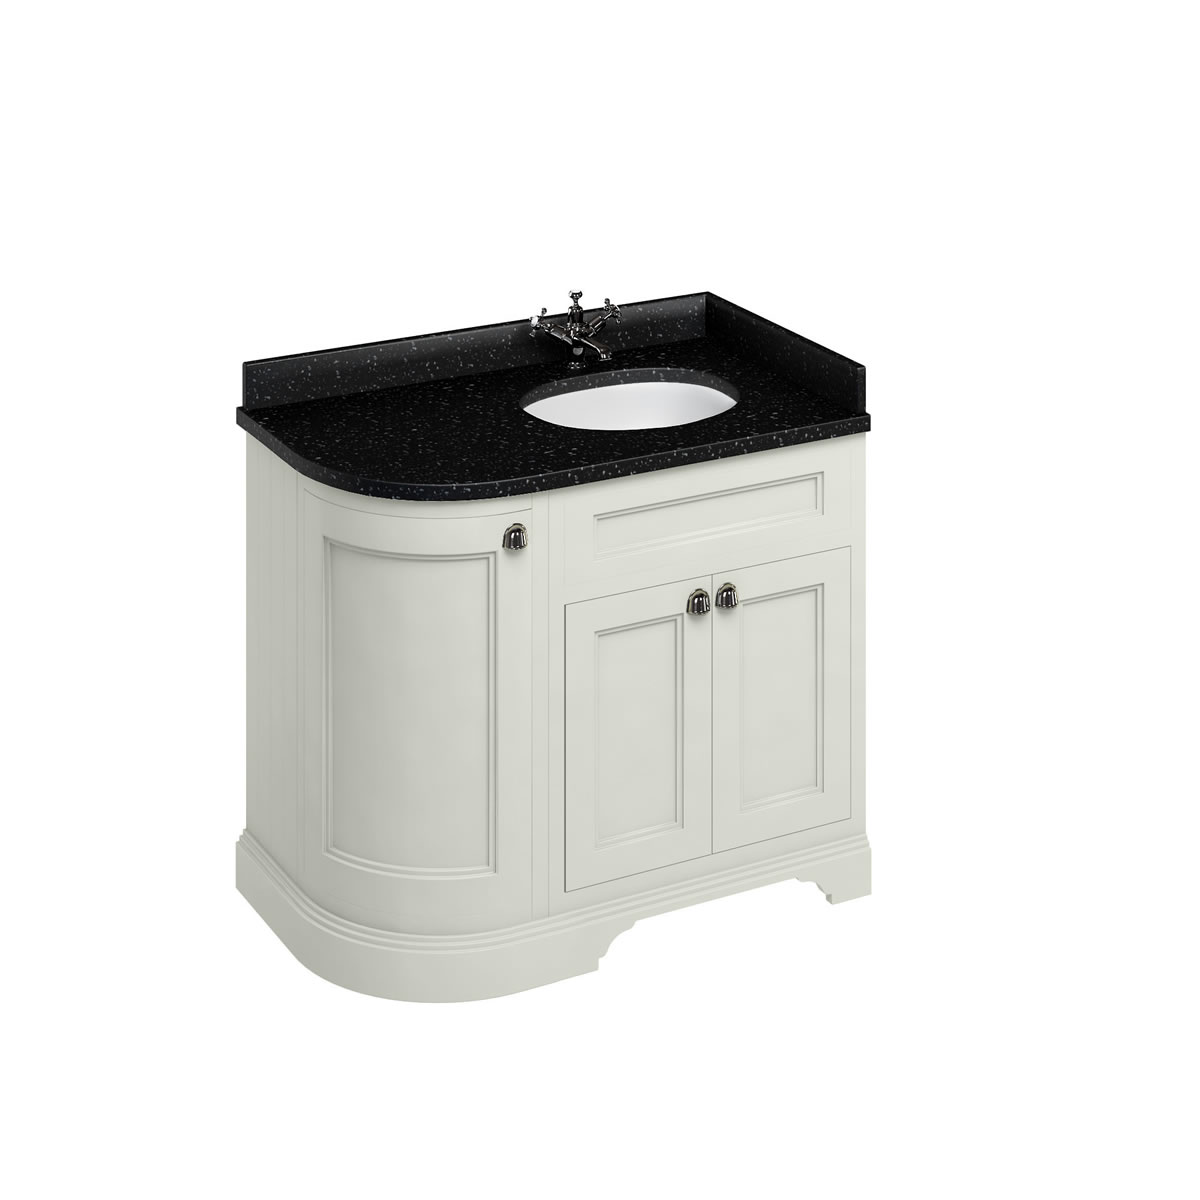 Freestanding 100 Curved Corner Vanity Unit Right Hand - Sand and Minerva black granite worktop with integrated white basin